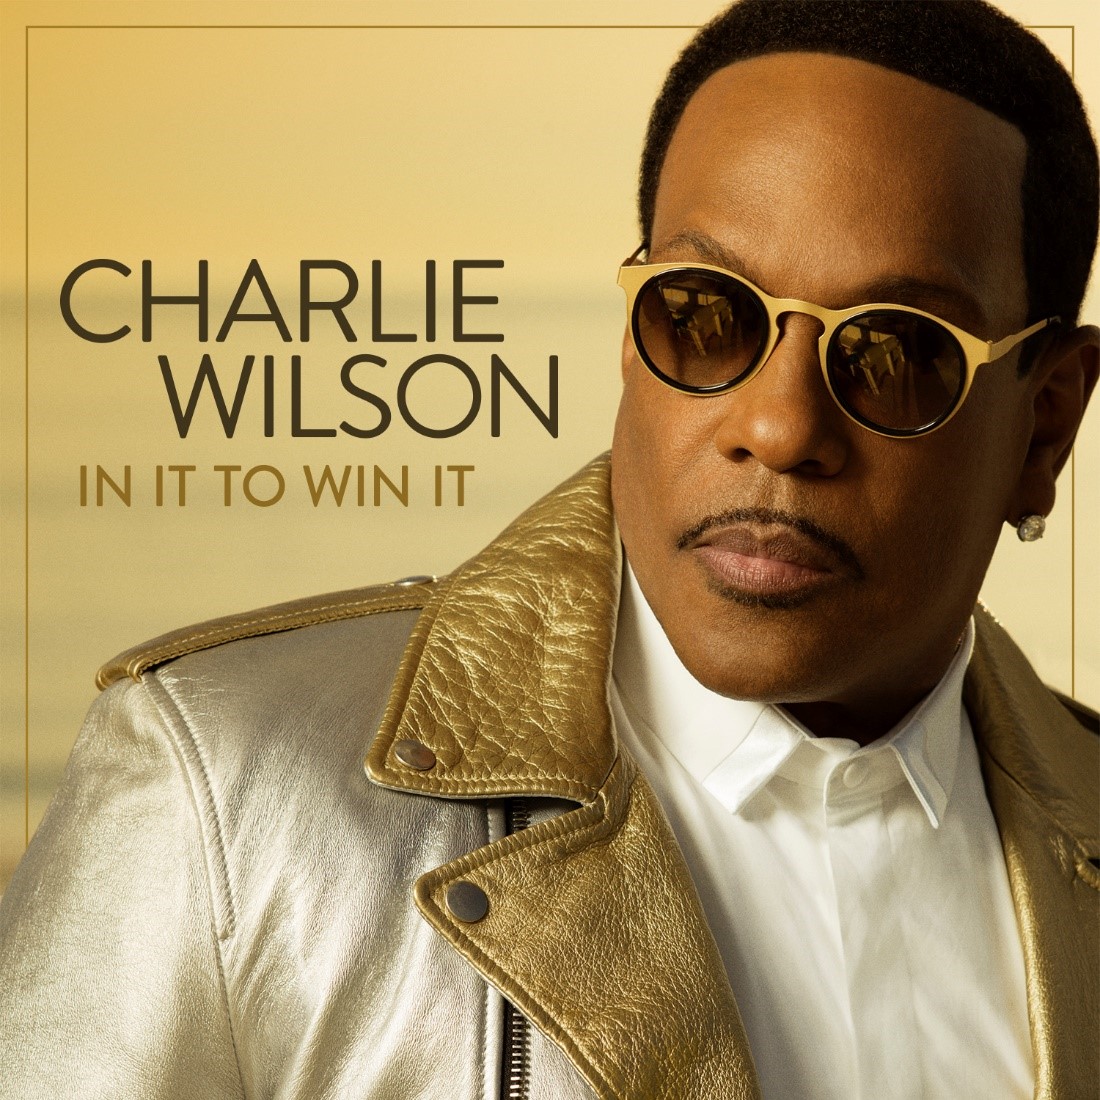 Charlie Wilson Has Another #1 Album With Latest Release "In It To Win It"